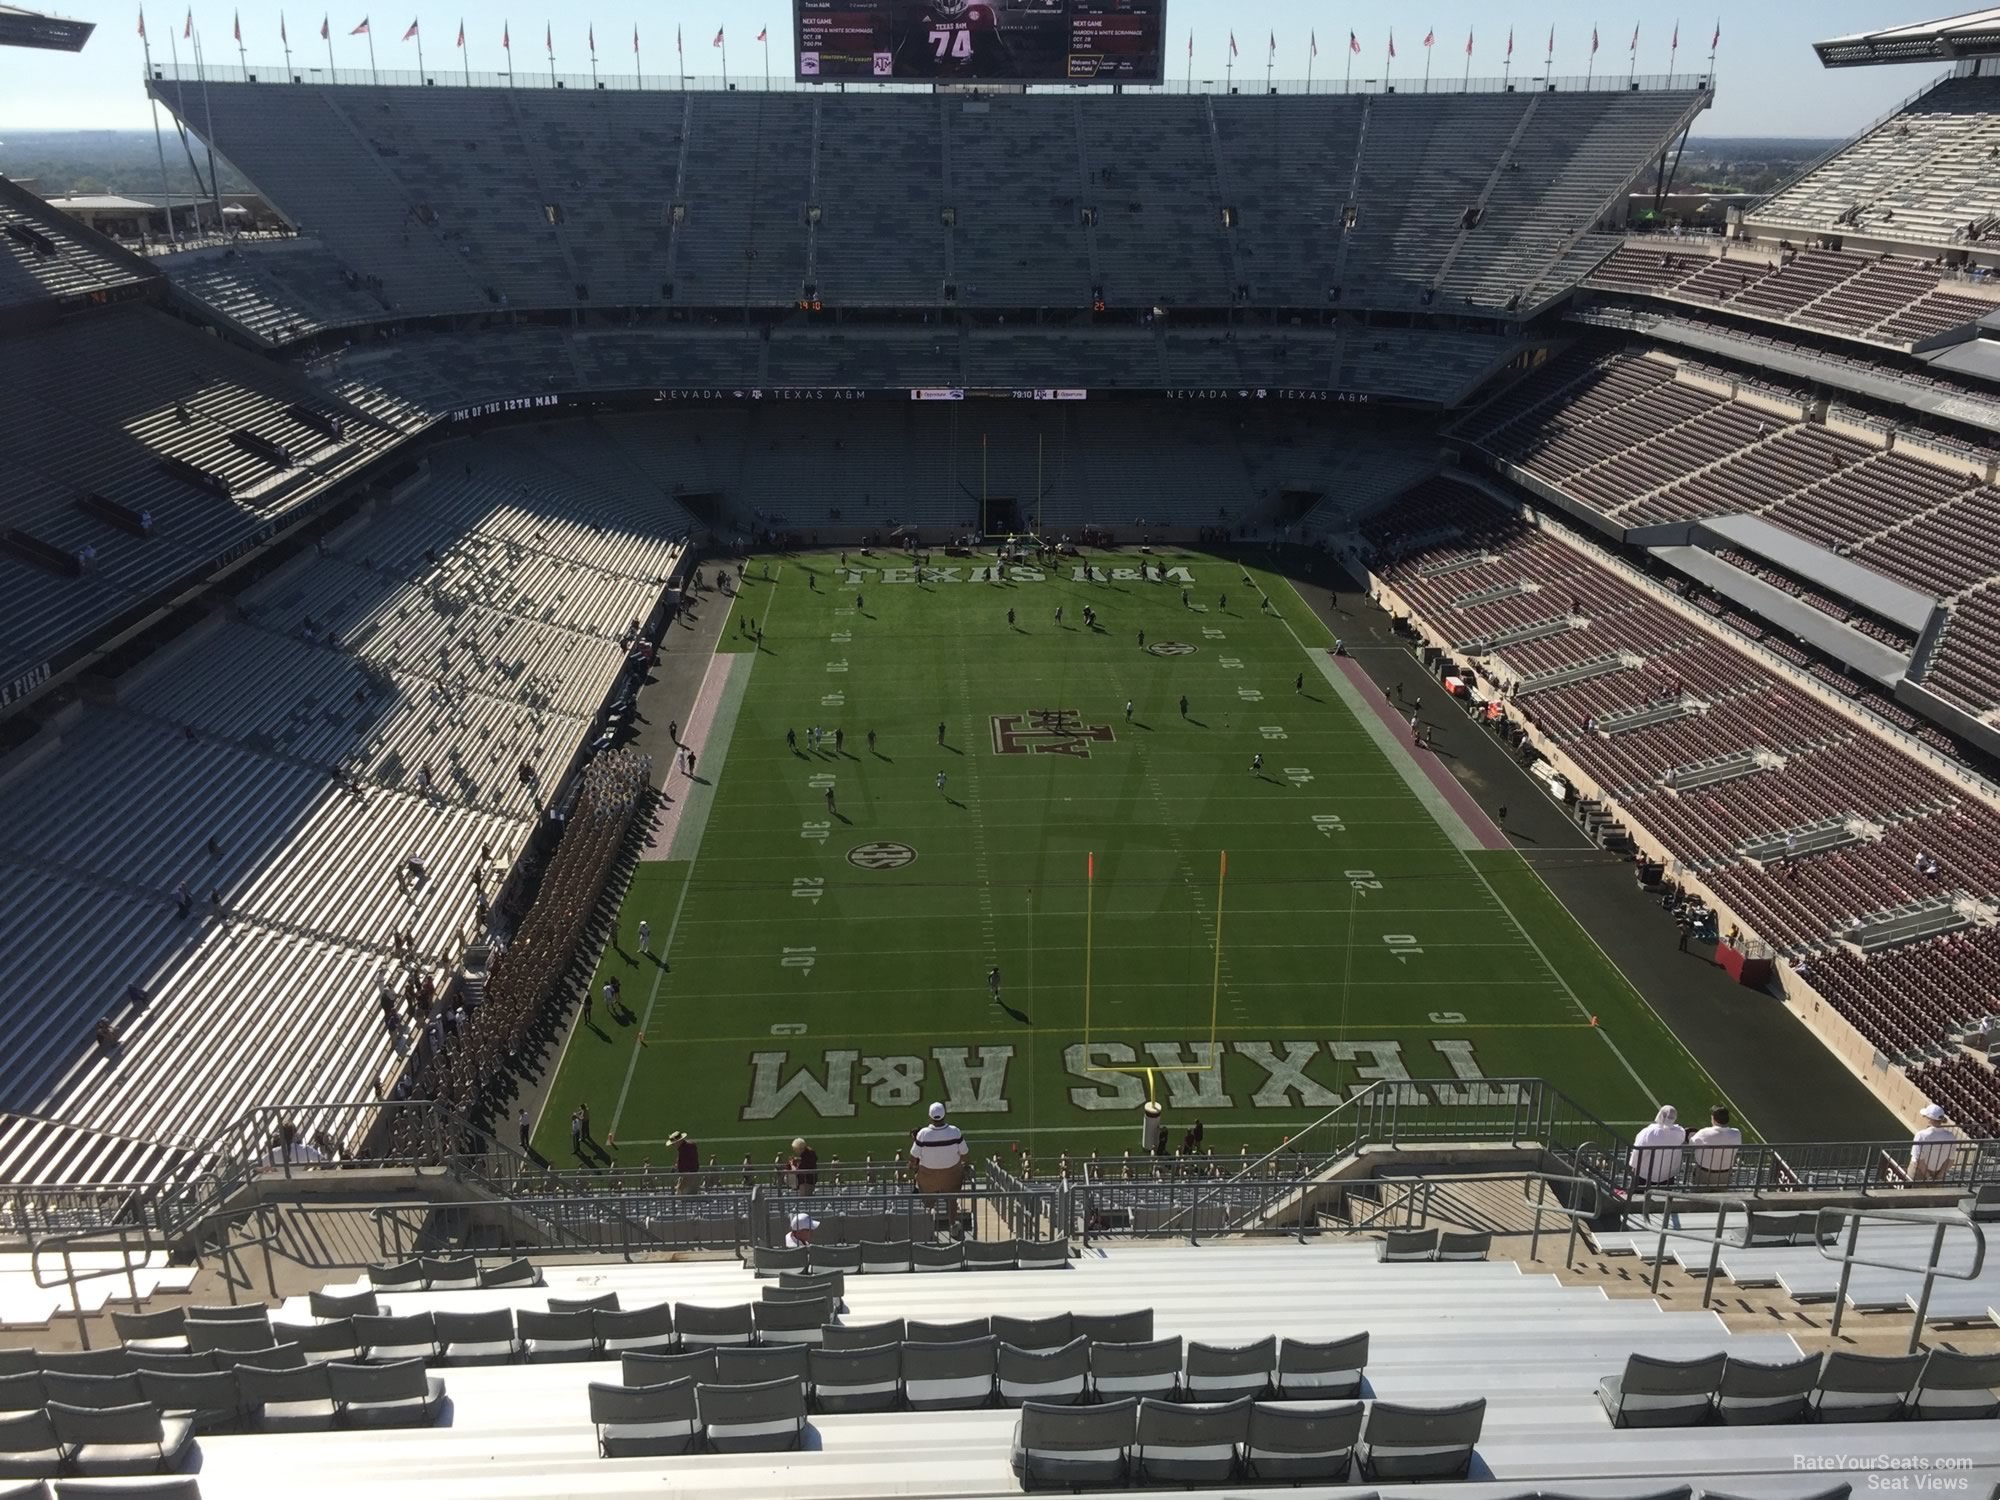 section 416, row 20 seat view  - kyle field